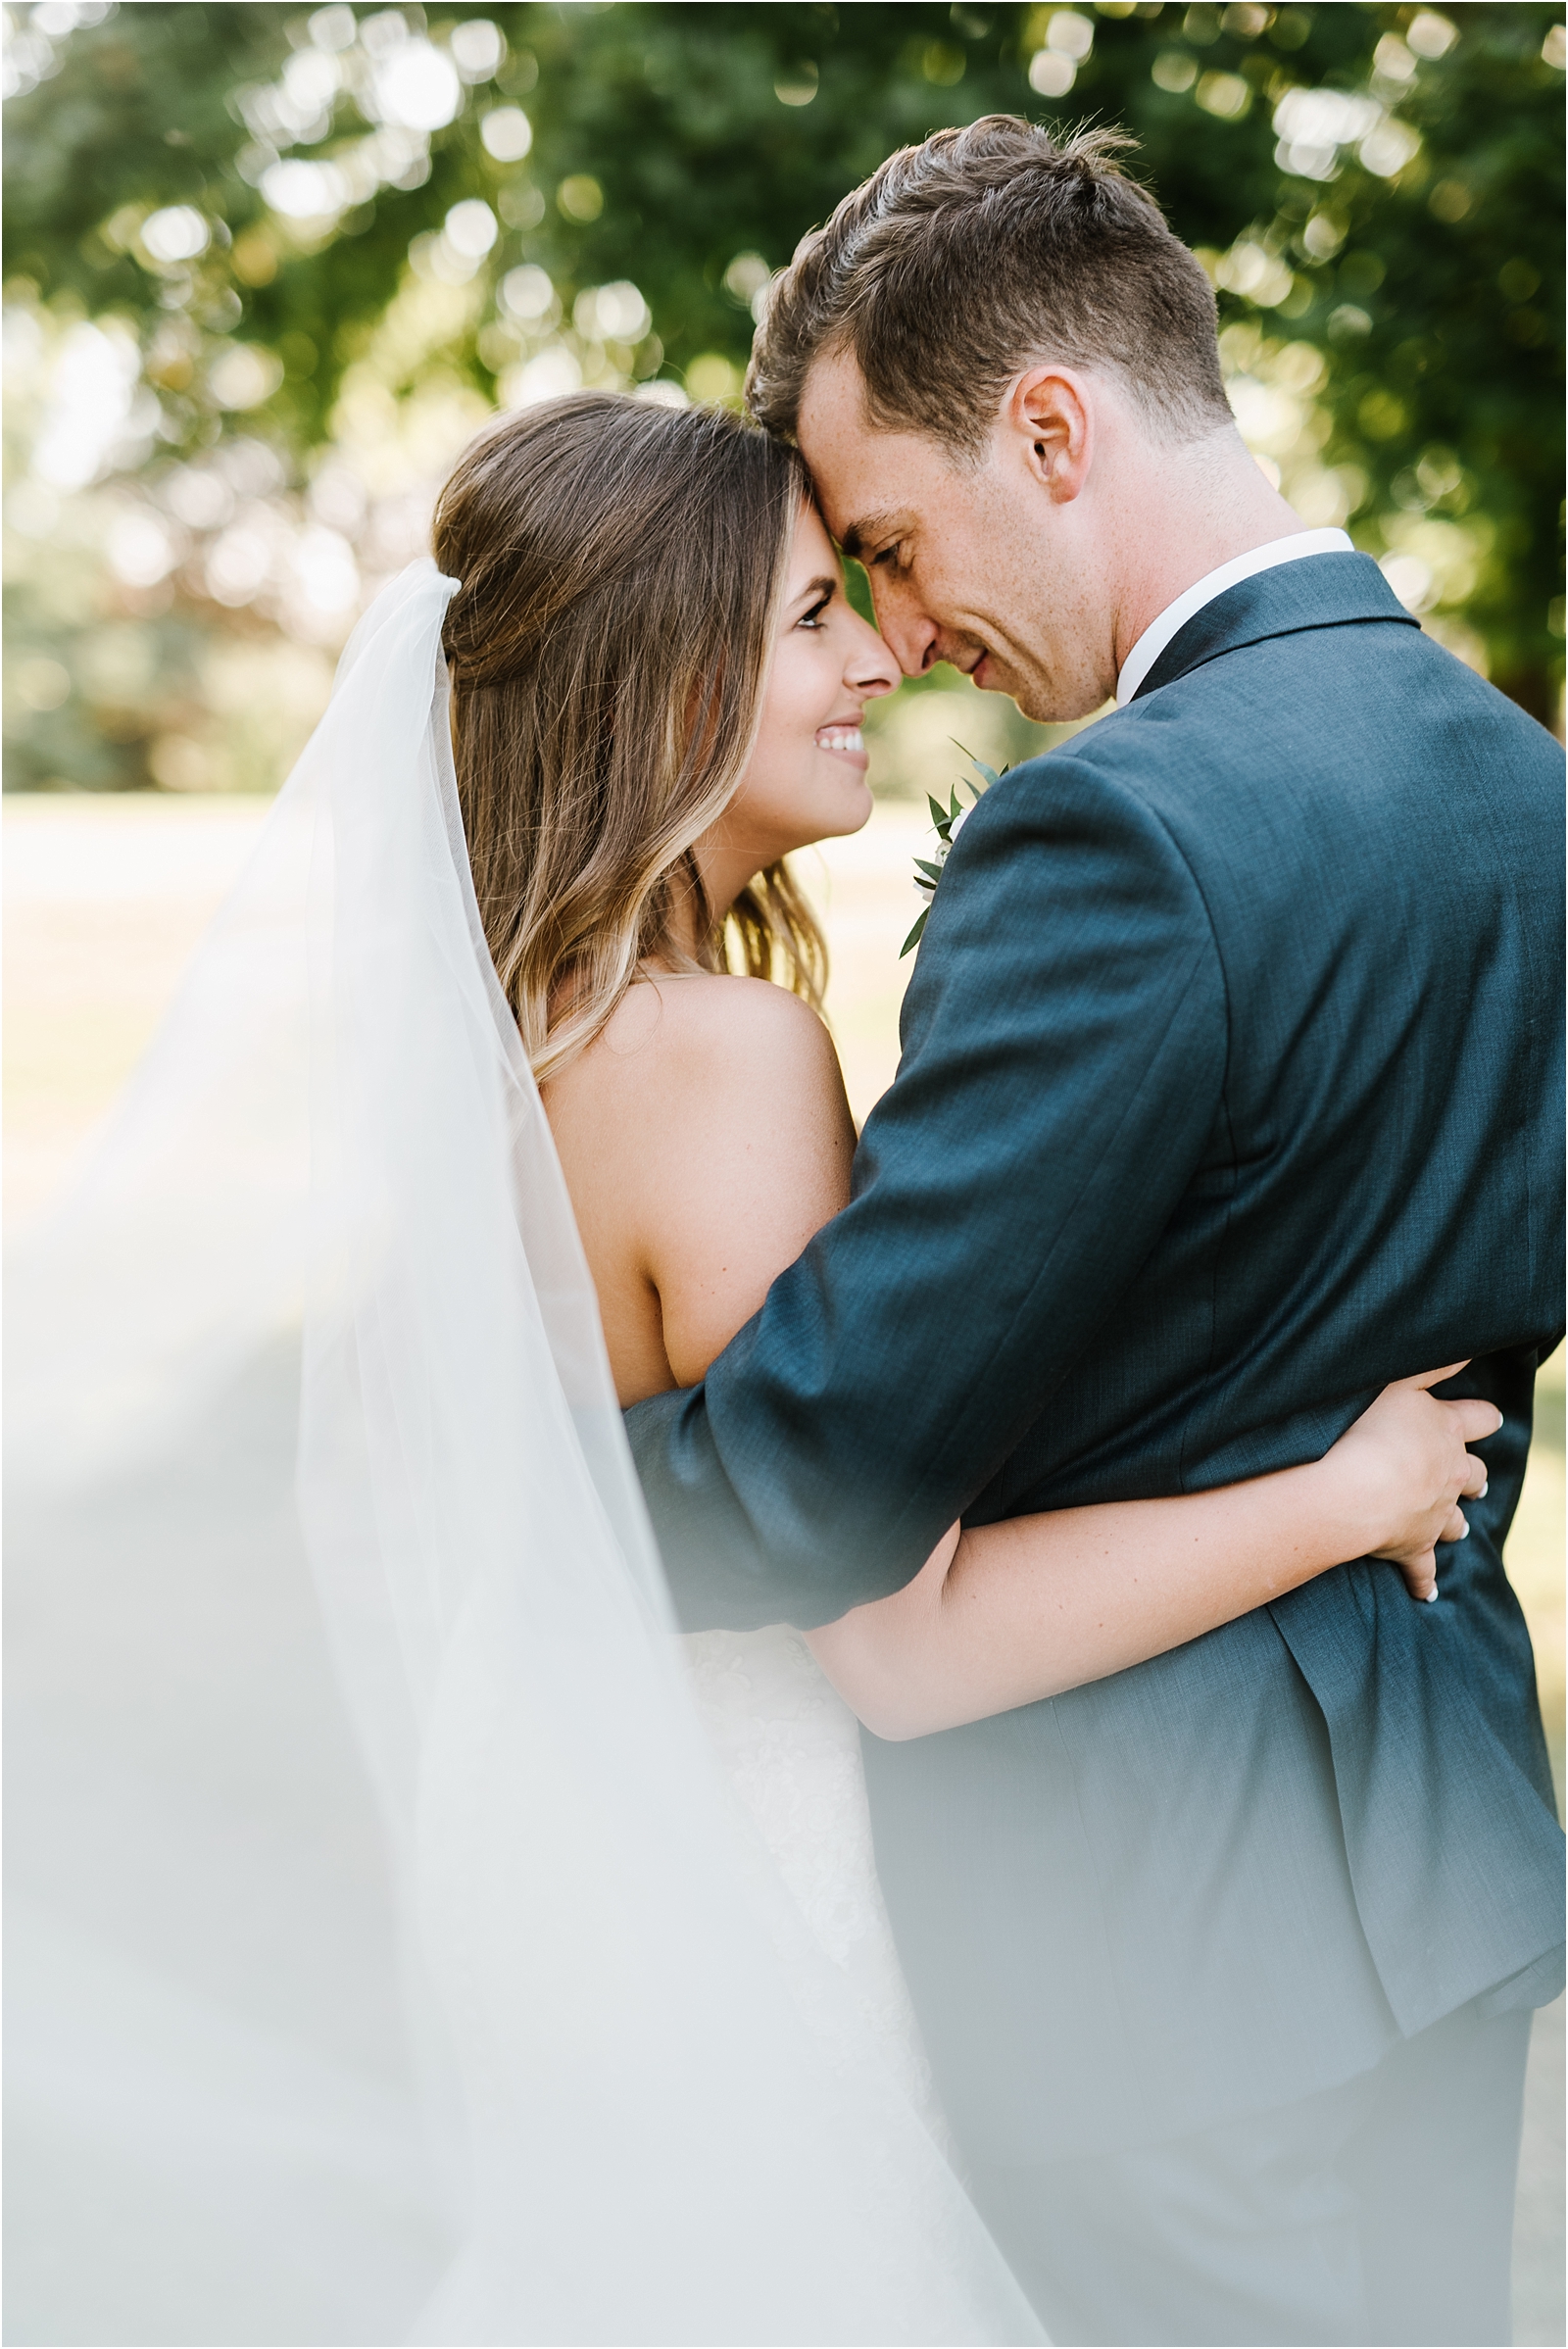 Sunny Summer Wedding at The Stevens Estate at Osgood Hill in North Andover, MA by Boston Wedding Photographer